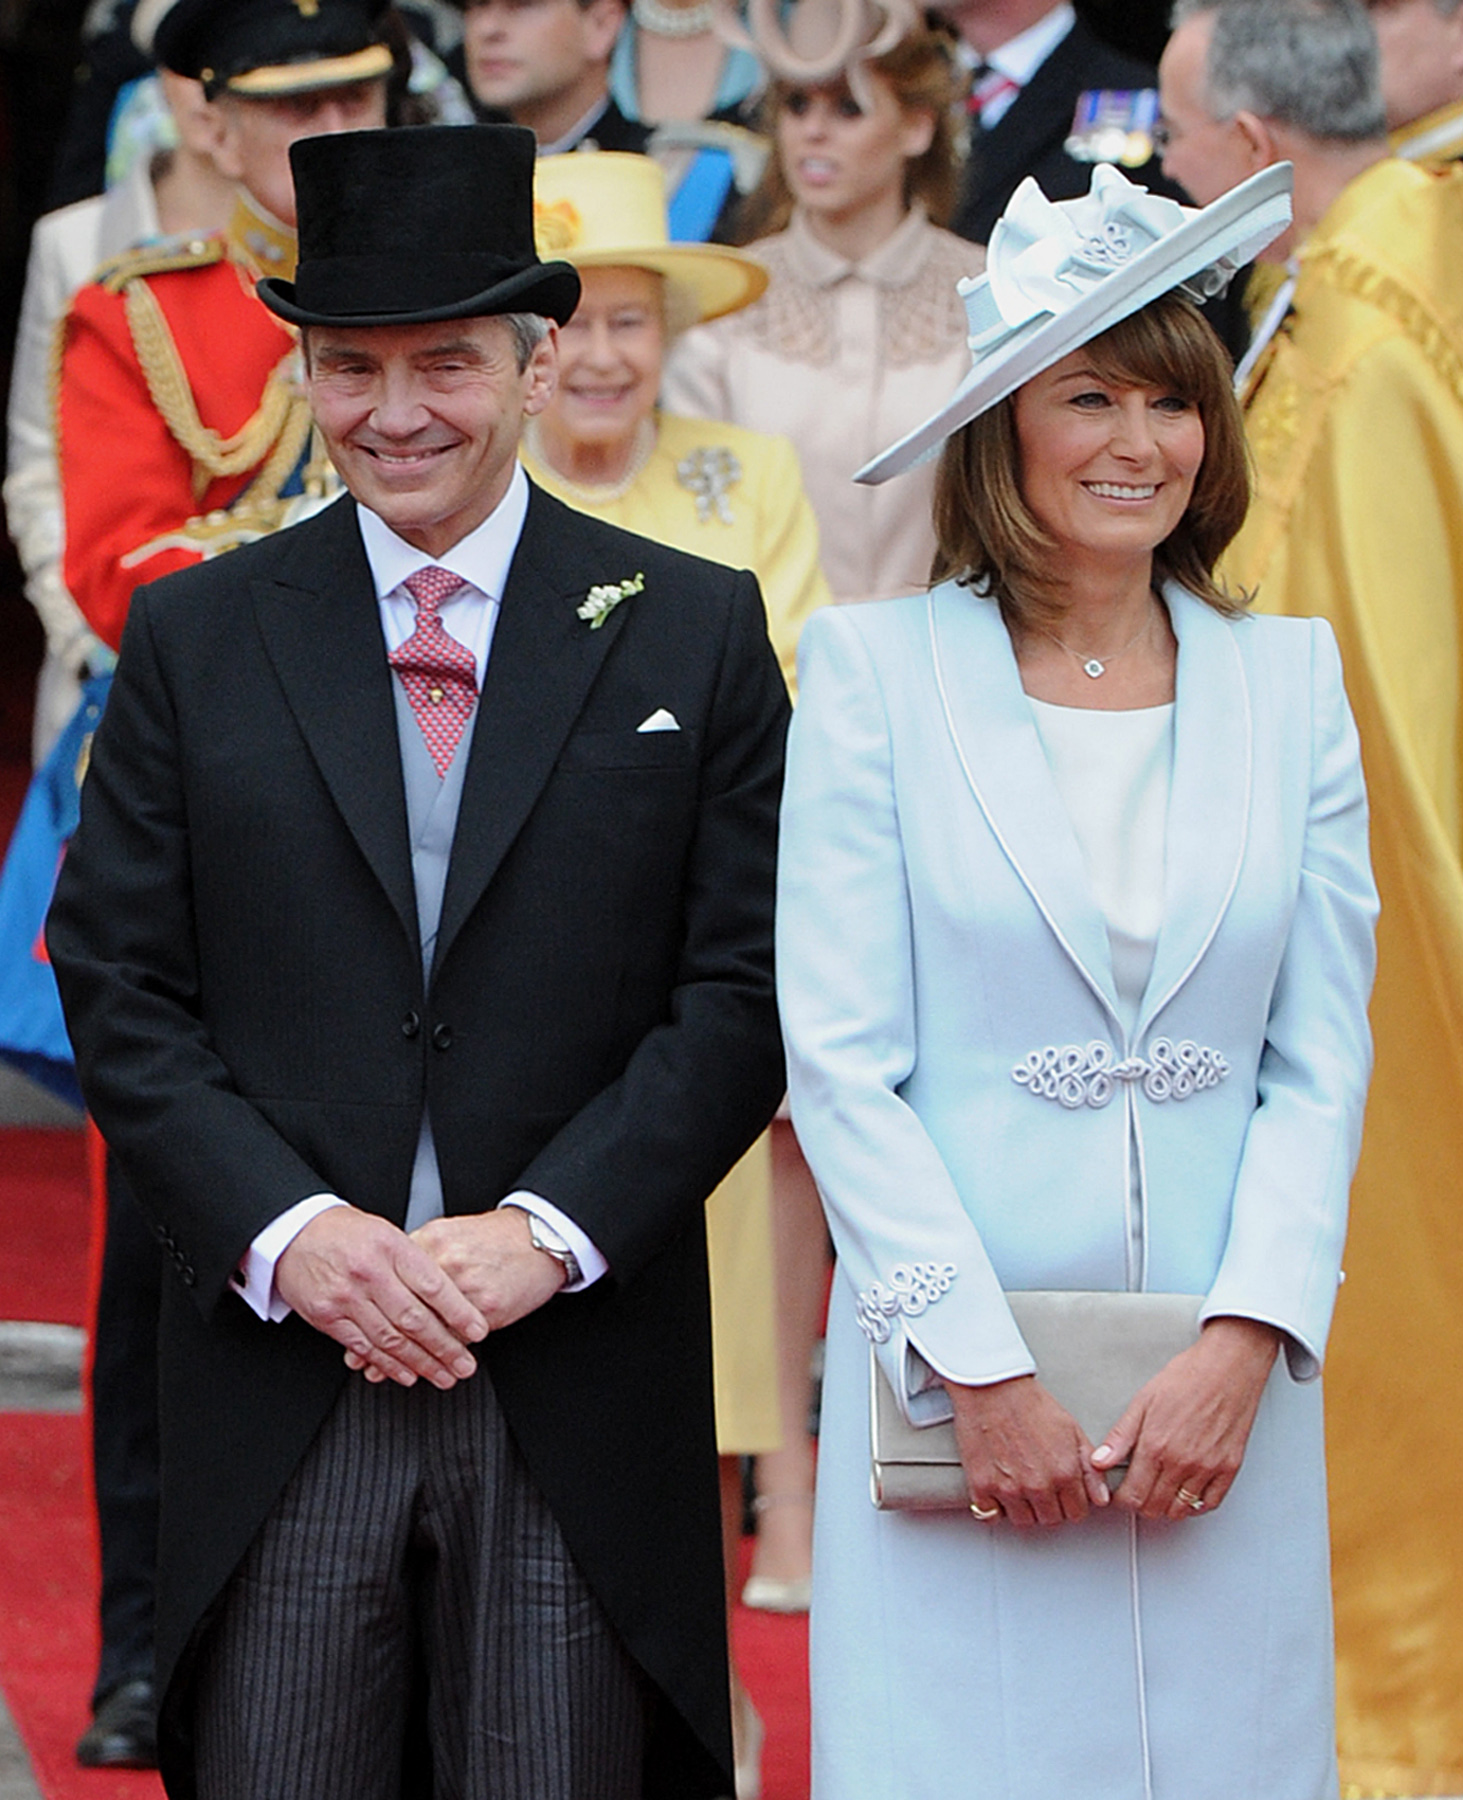 Michael and Carole Middleton come out of Westminster Abbey in London, following the wedding ceremony of Britain's Prince William and their daughter, on April 29, 2011. | Source: Getty Images